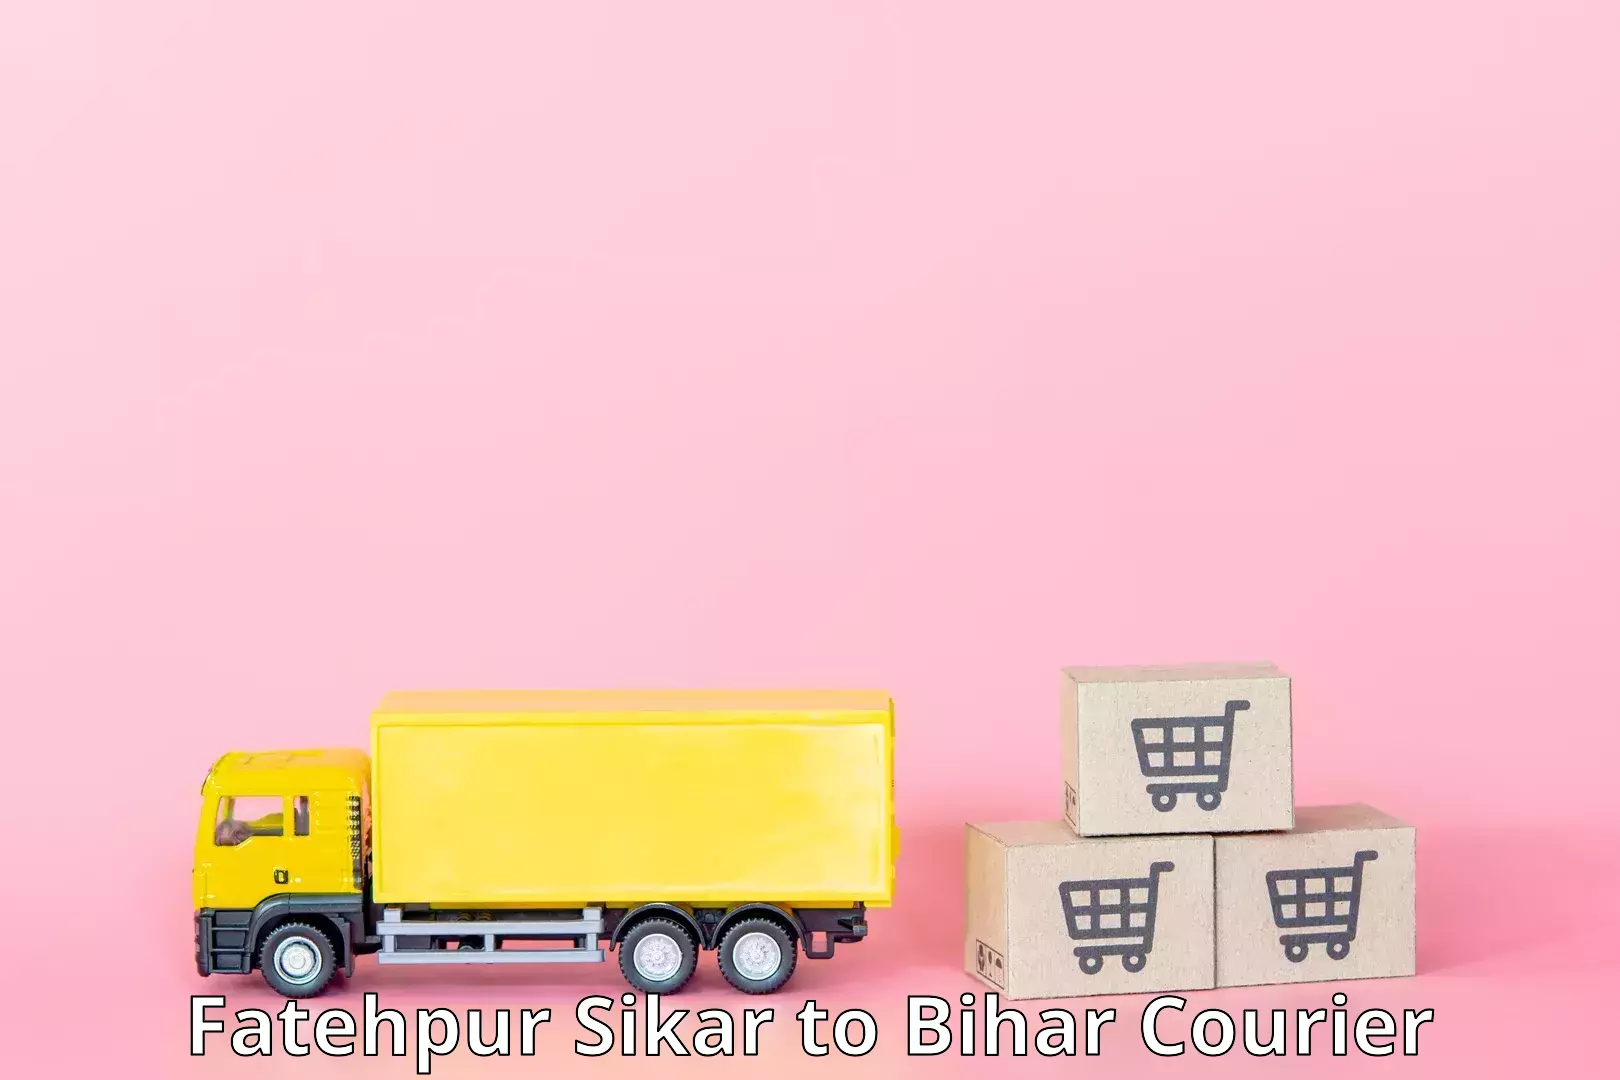 Supply chain delivery Fatehpur Sikar to Bihar